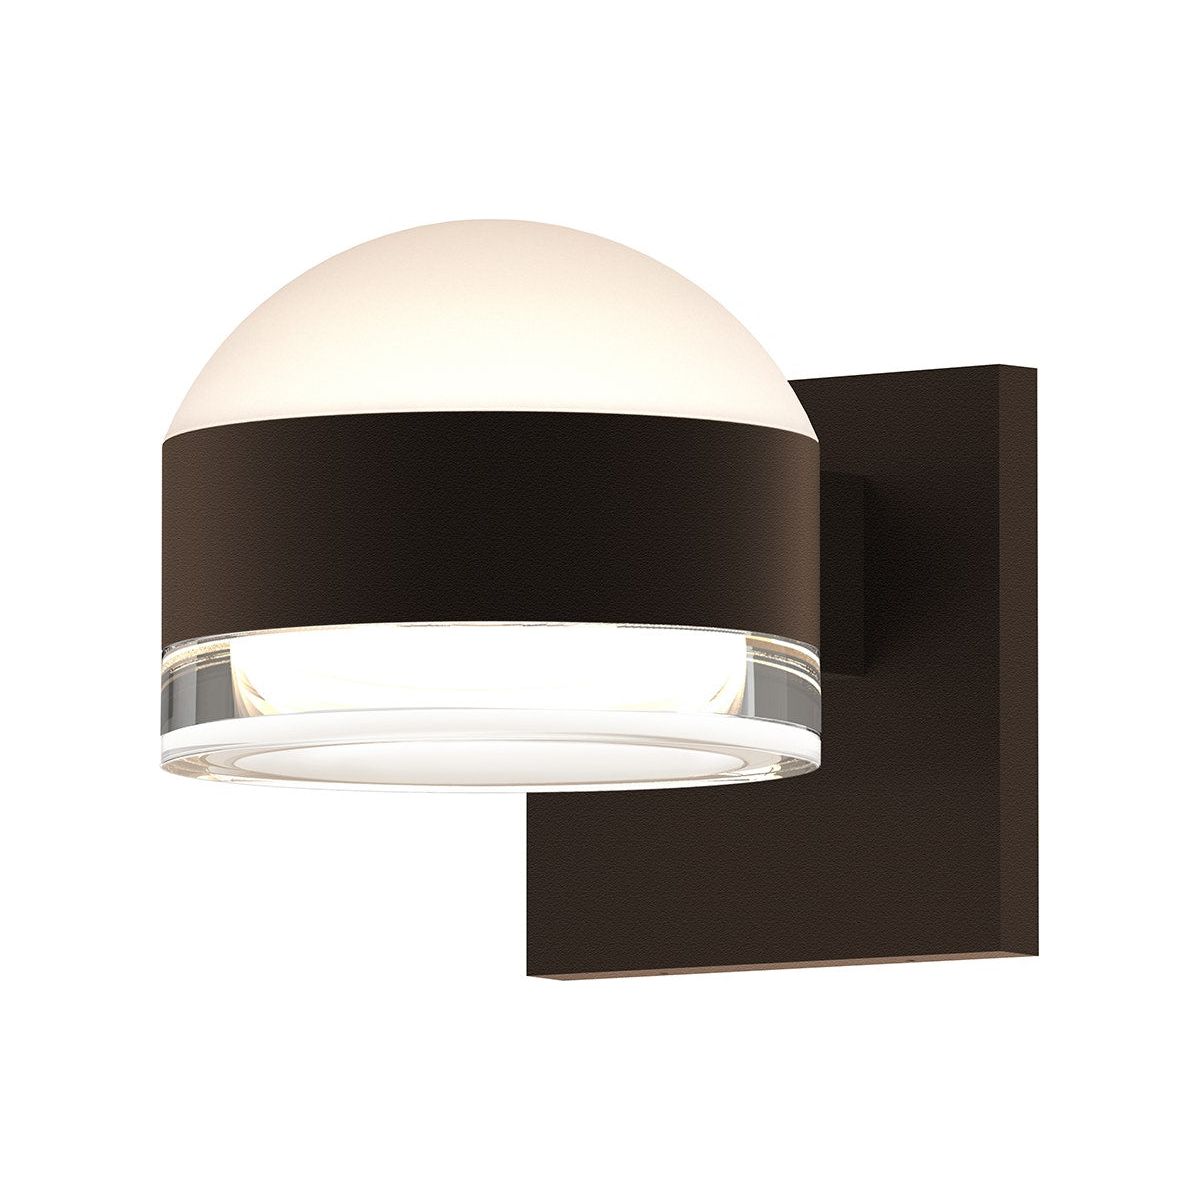 REALS Up/Down LED Sconce with Dome Top and Cylinder Bottom